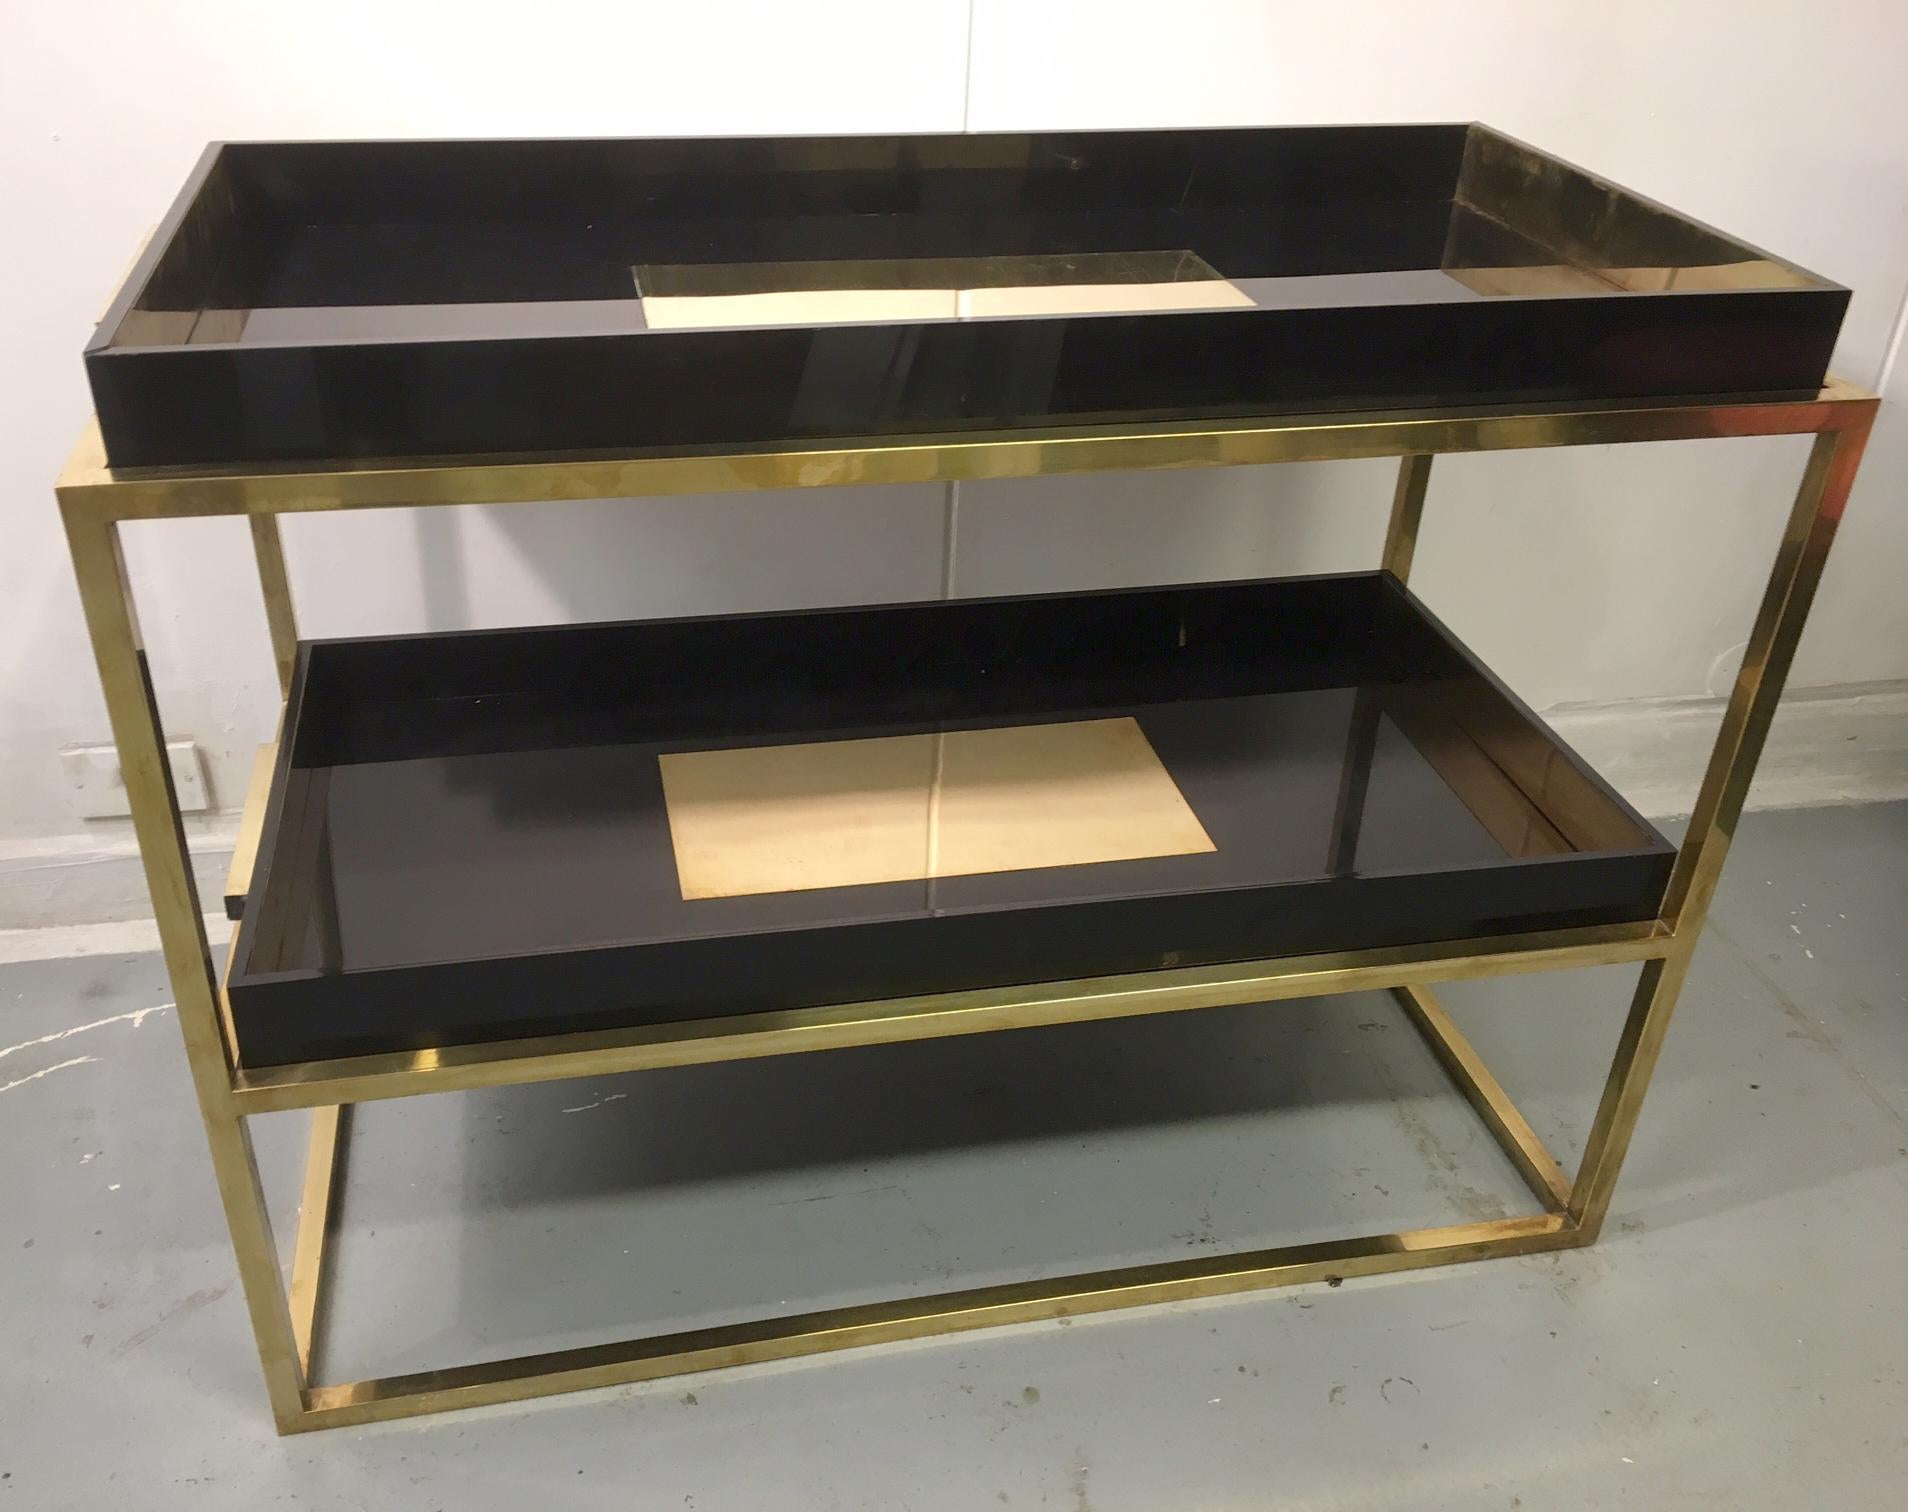 Elegant console table in lacquered wood and brass with two service trays.
Design Ferdinando Loffredo.